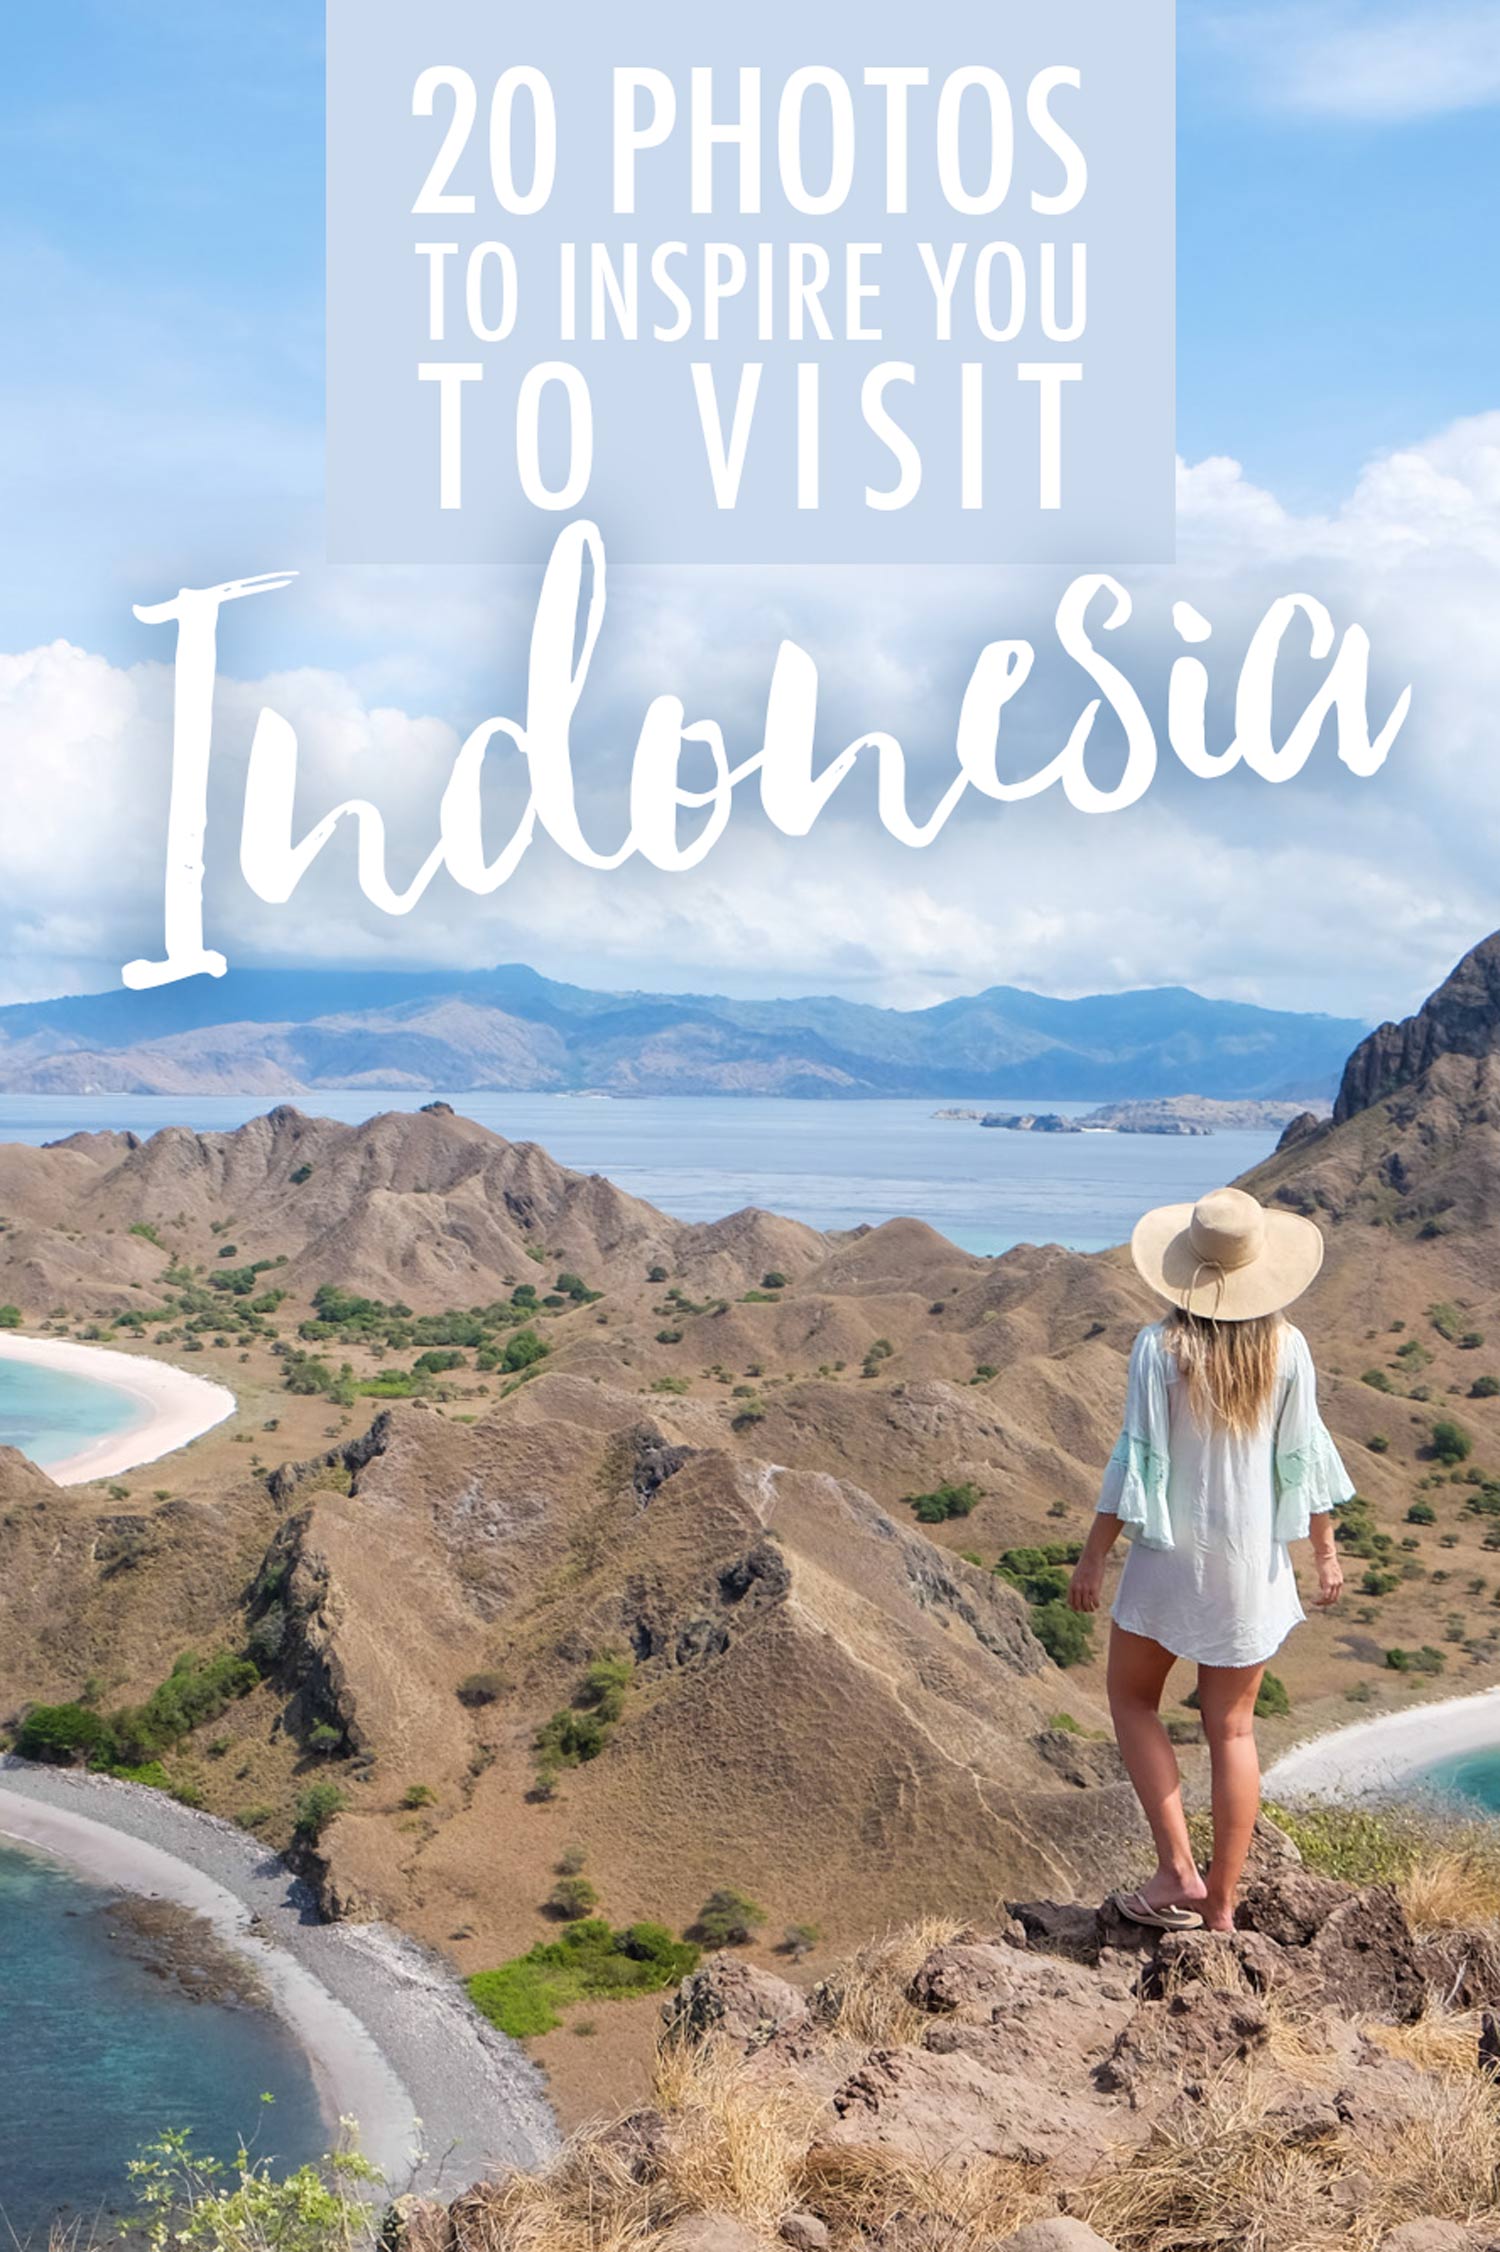 20 Photos to Inspire You to Visit Indonesia